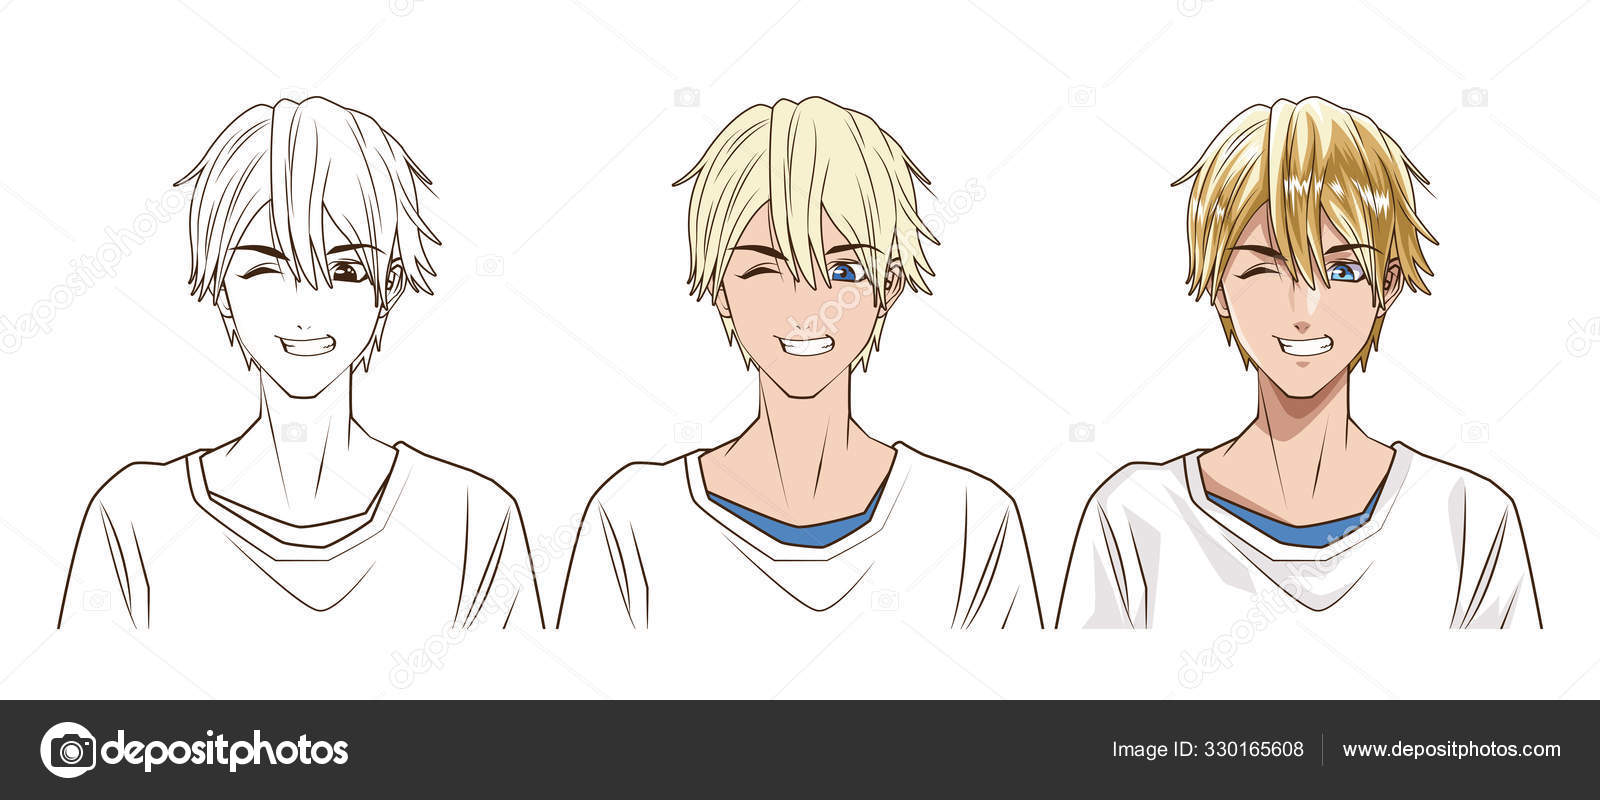 Premium Vector | Drawing process of young woman anime style character  vector illustration design